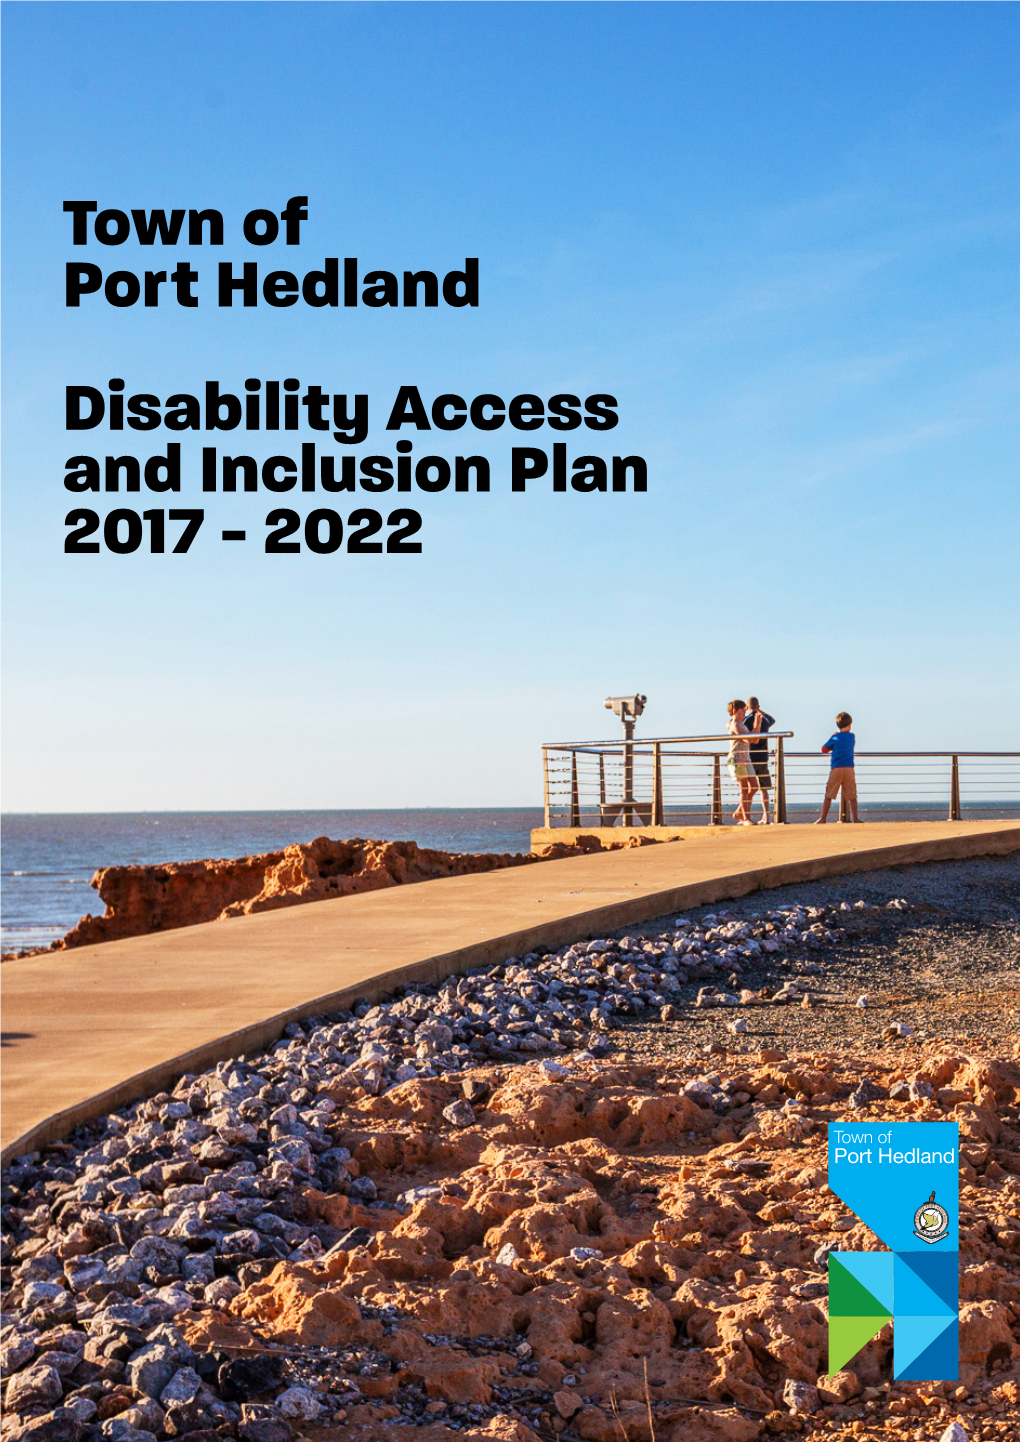 Town of Port Hedland Disability Access and Inclusion Plan 2017